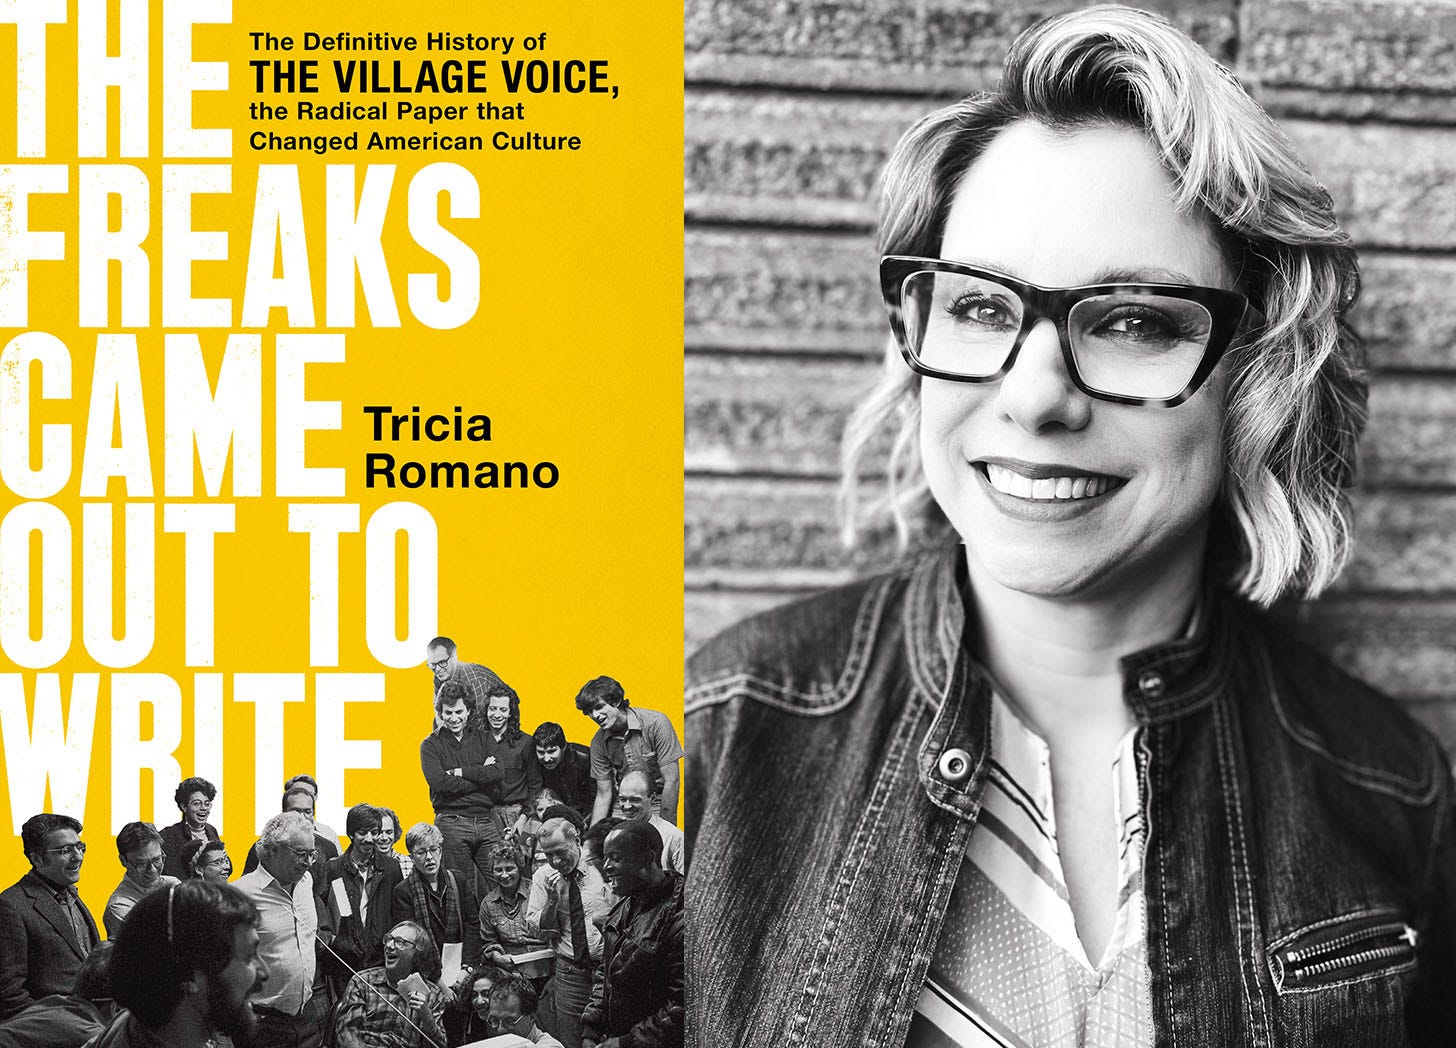 The cover of Tricia Romano's book, The Freaks Came Out To Write: The Definitive History of the Village Voice, the Radical Paper that Changed American Culture appears next to a black-and-white headshot of Romano, who's wearing a denim jacket and some snazzy glasses